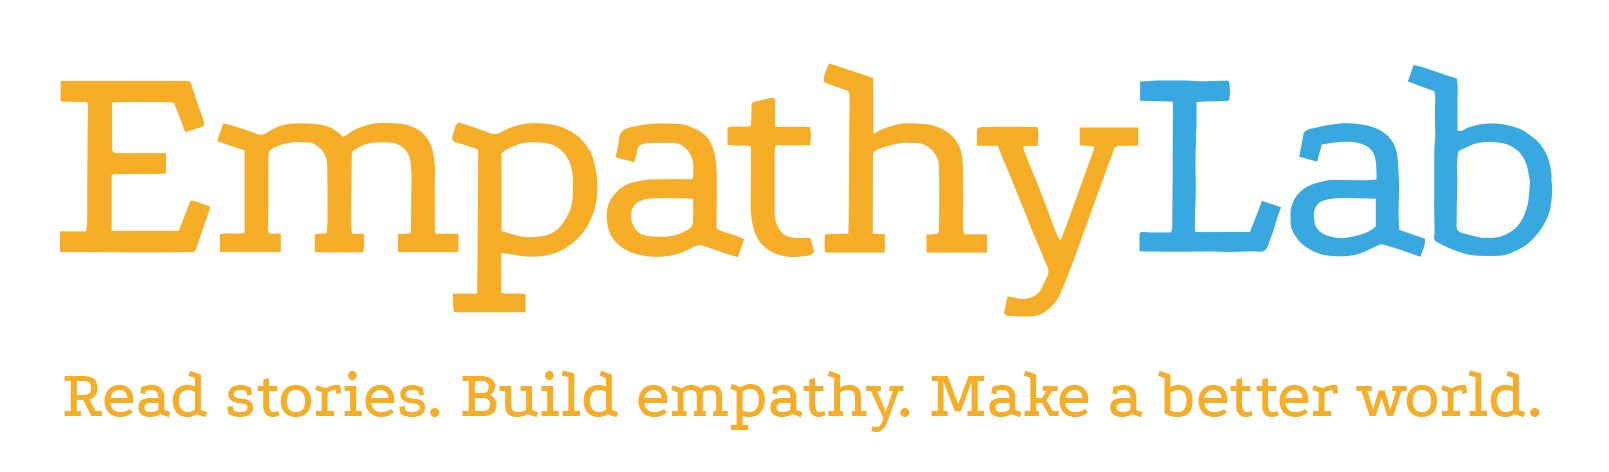 Primary Read for Empathy collection 2021